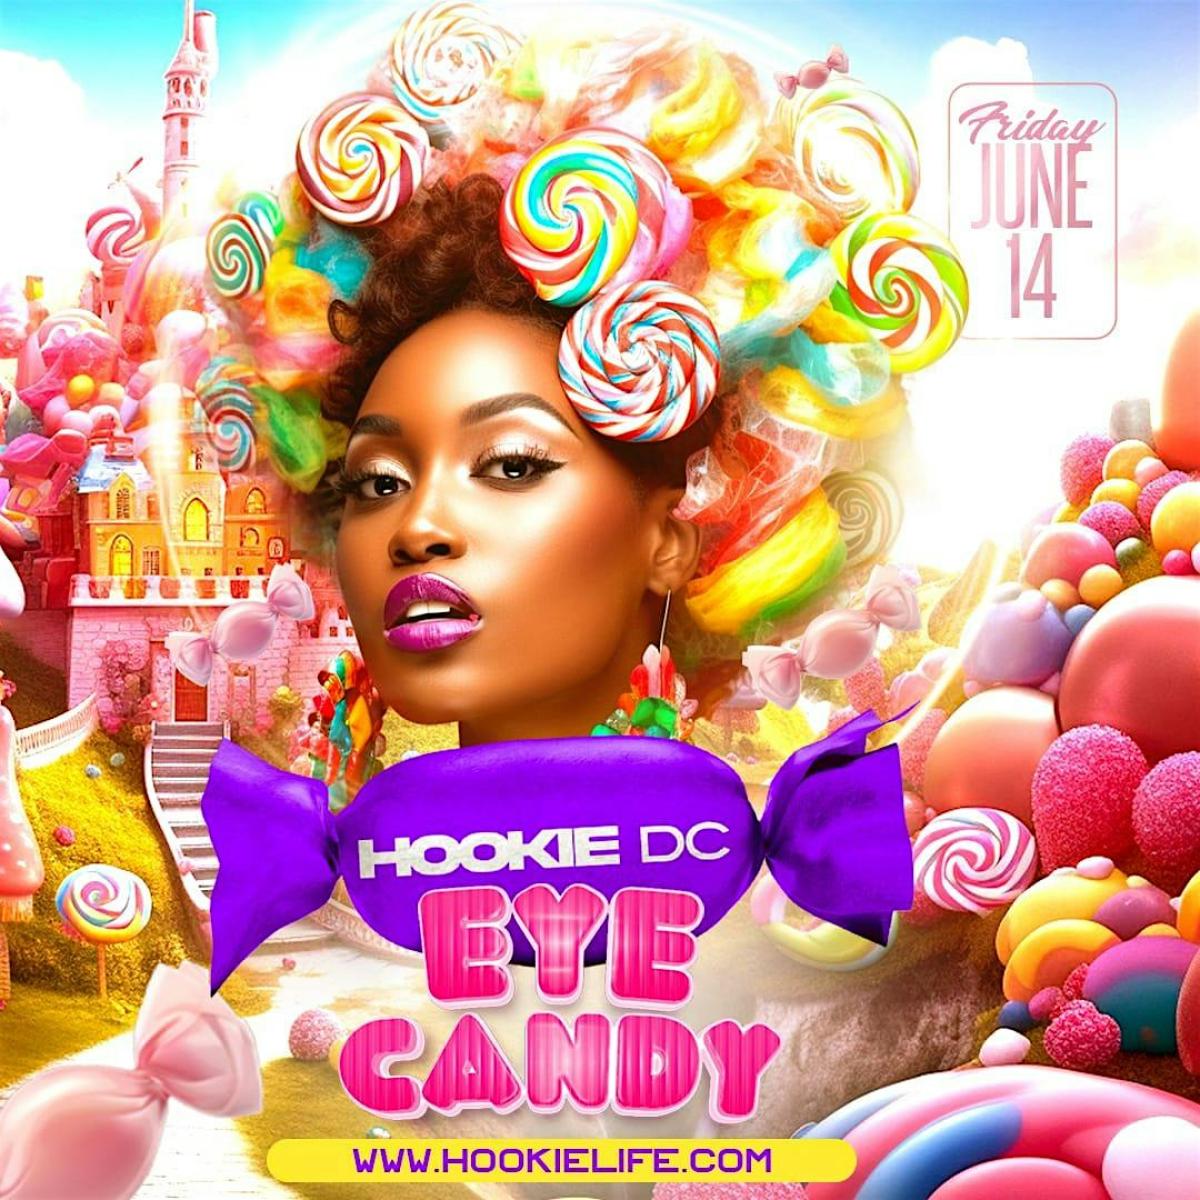 Hookie DC  Eye Candy flyer or graphic.